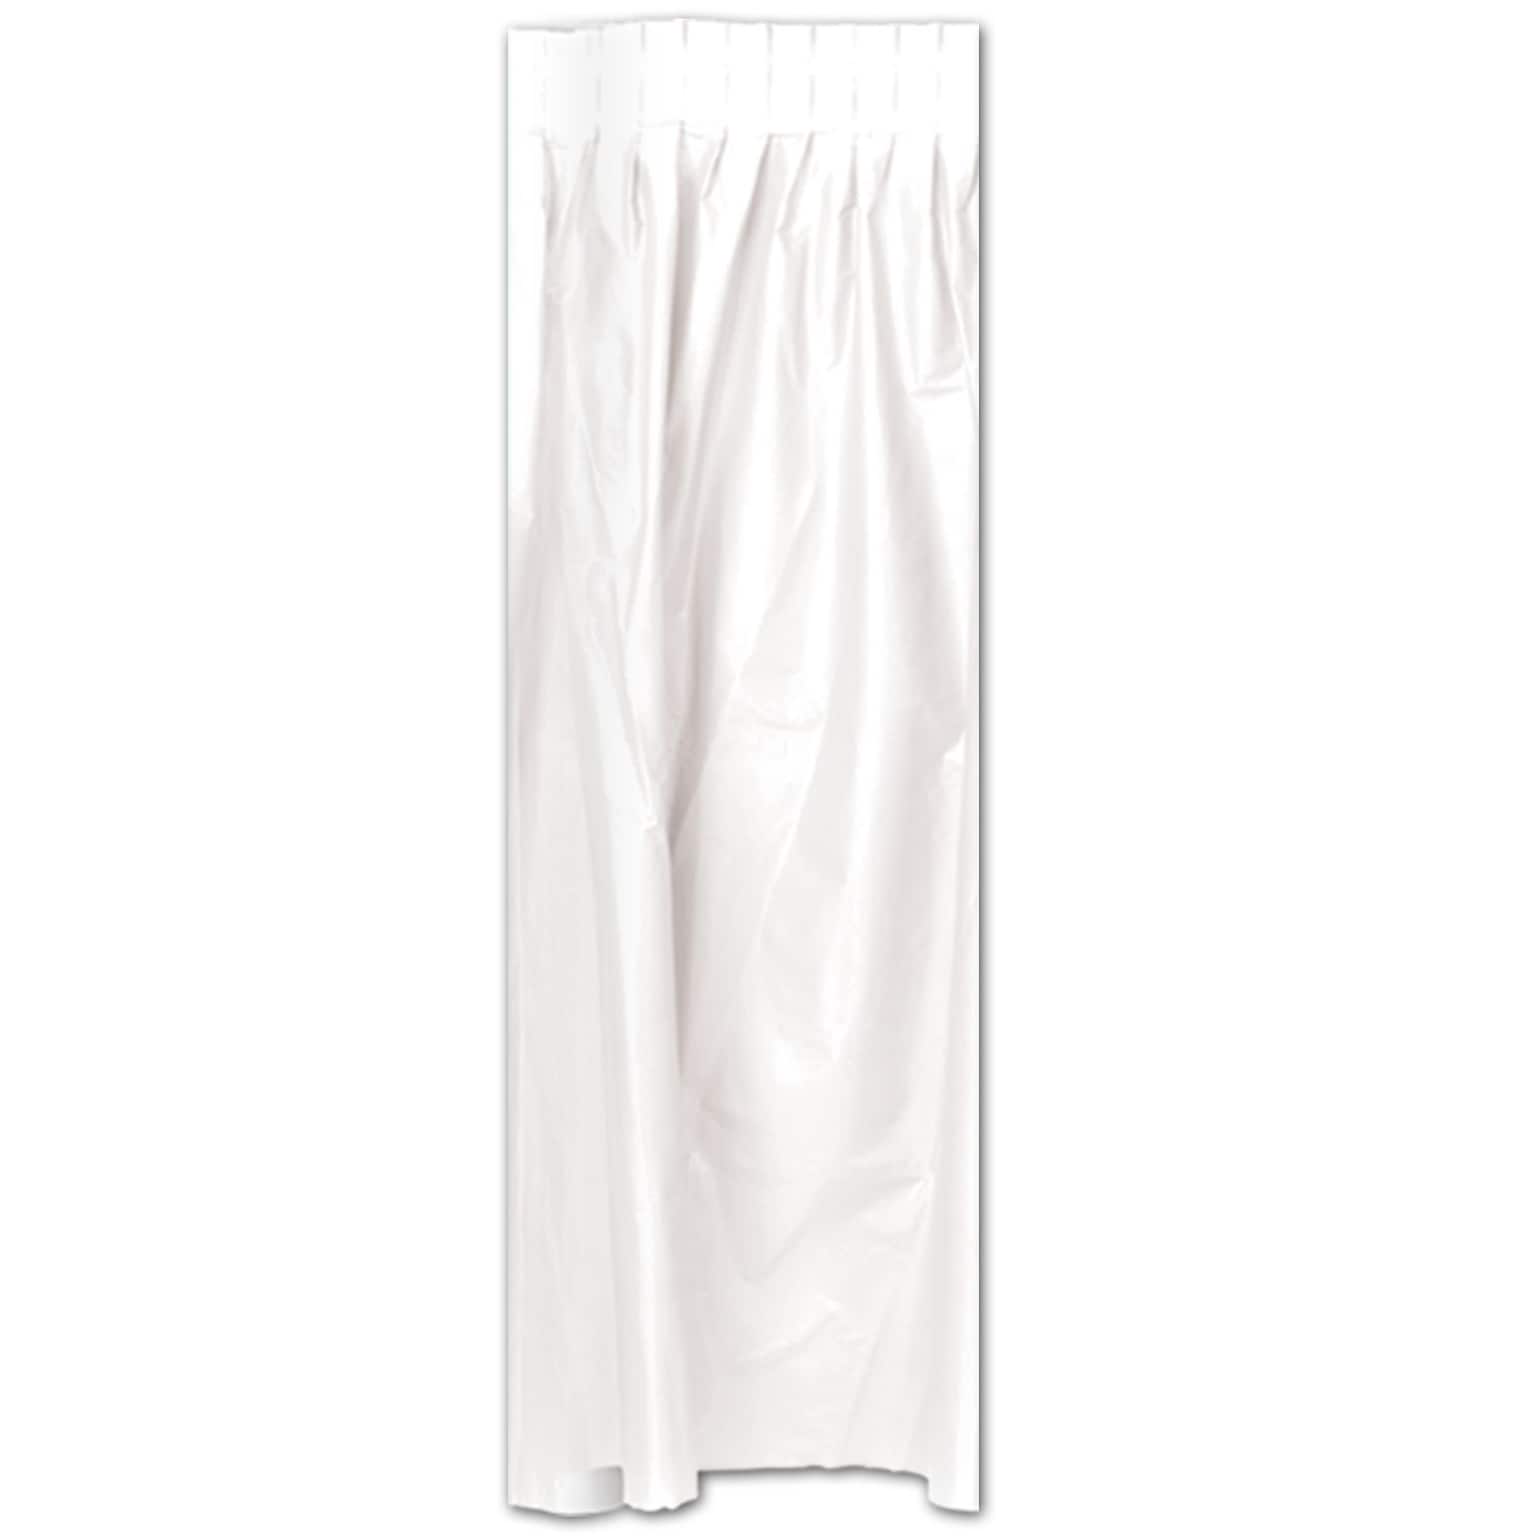 Beistle 29 x 14 Plastic Table Skirting, White, 2/Pack (50950-W)